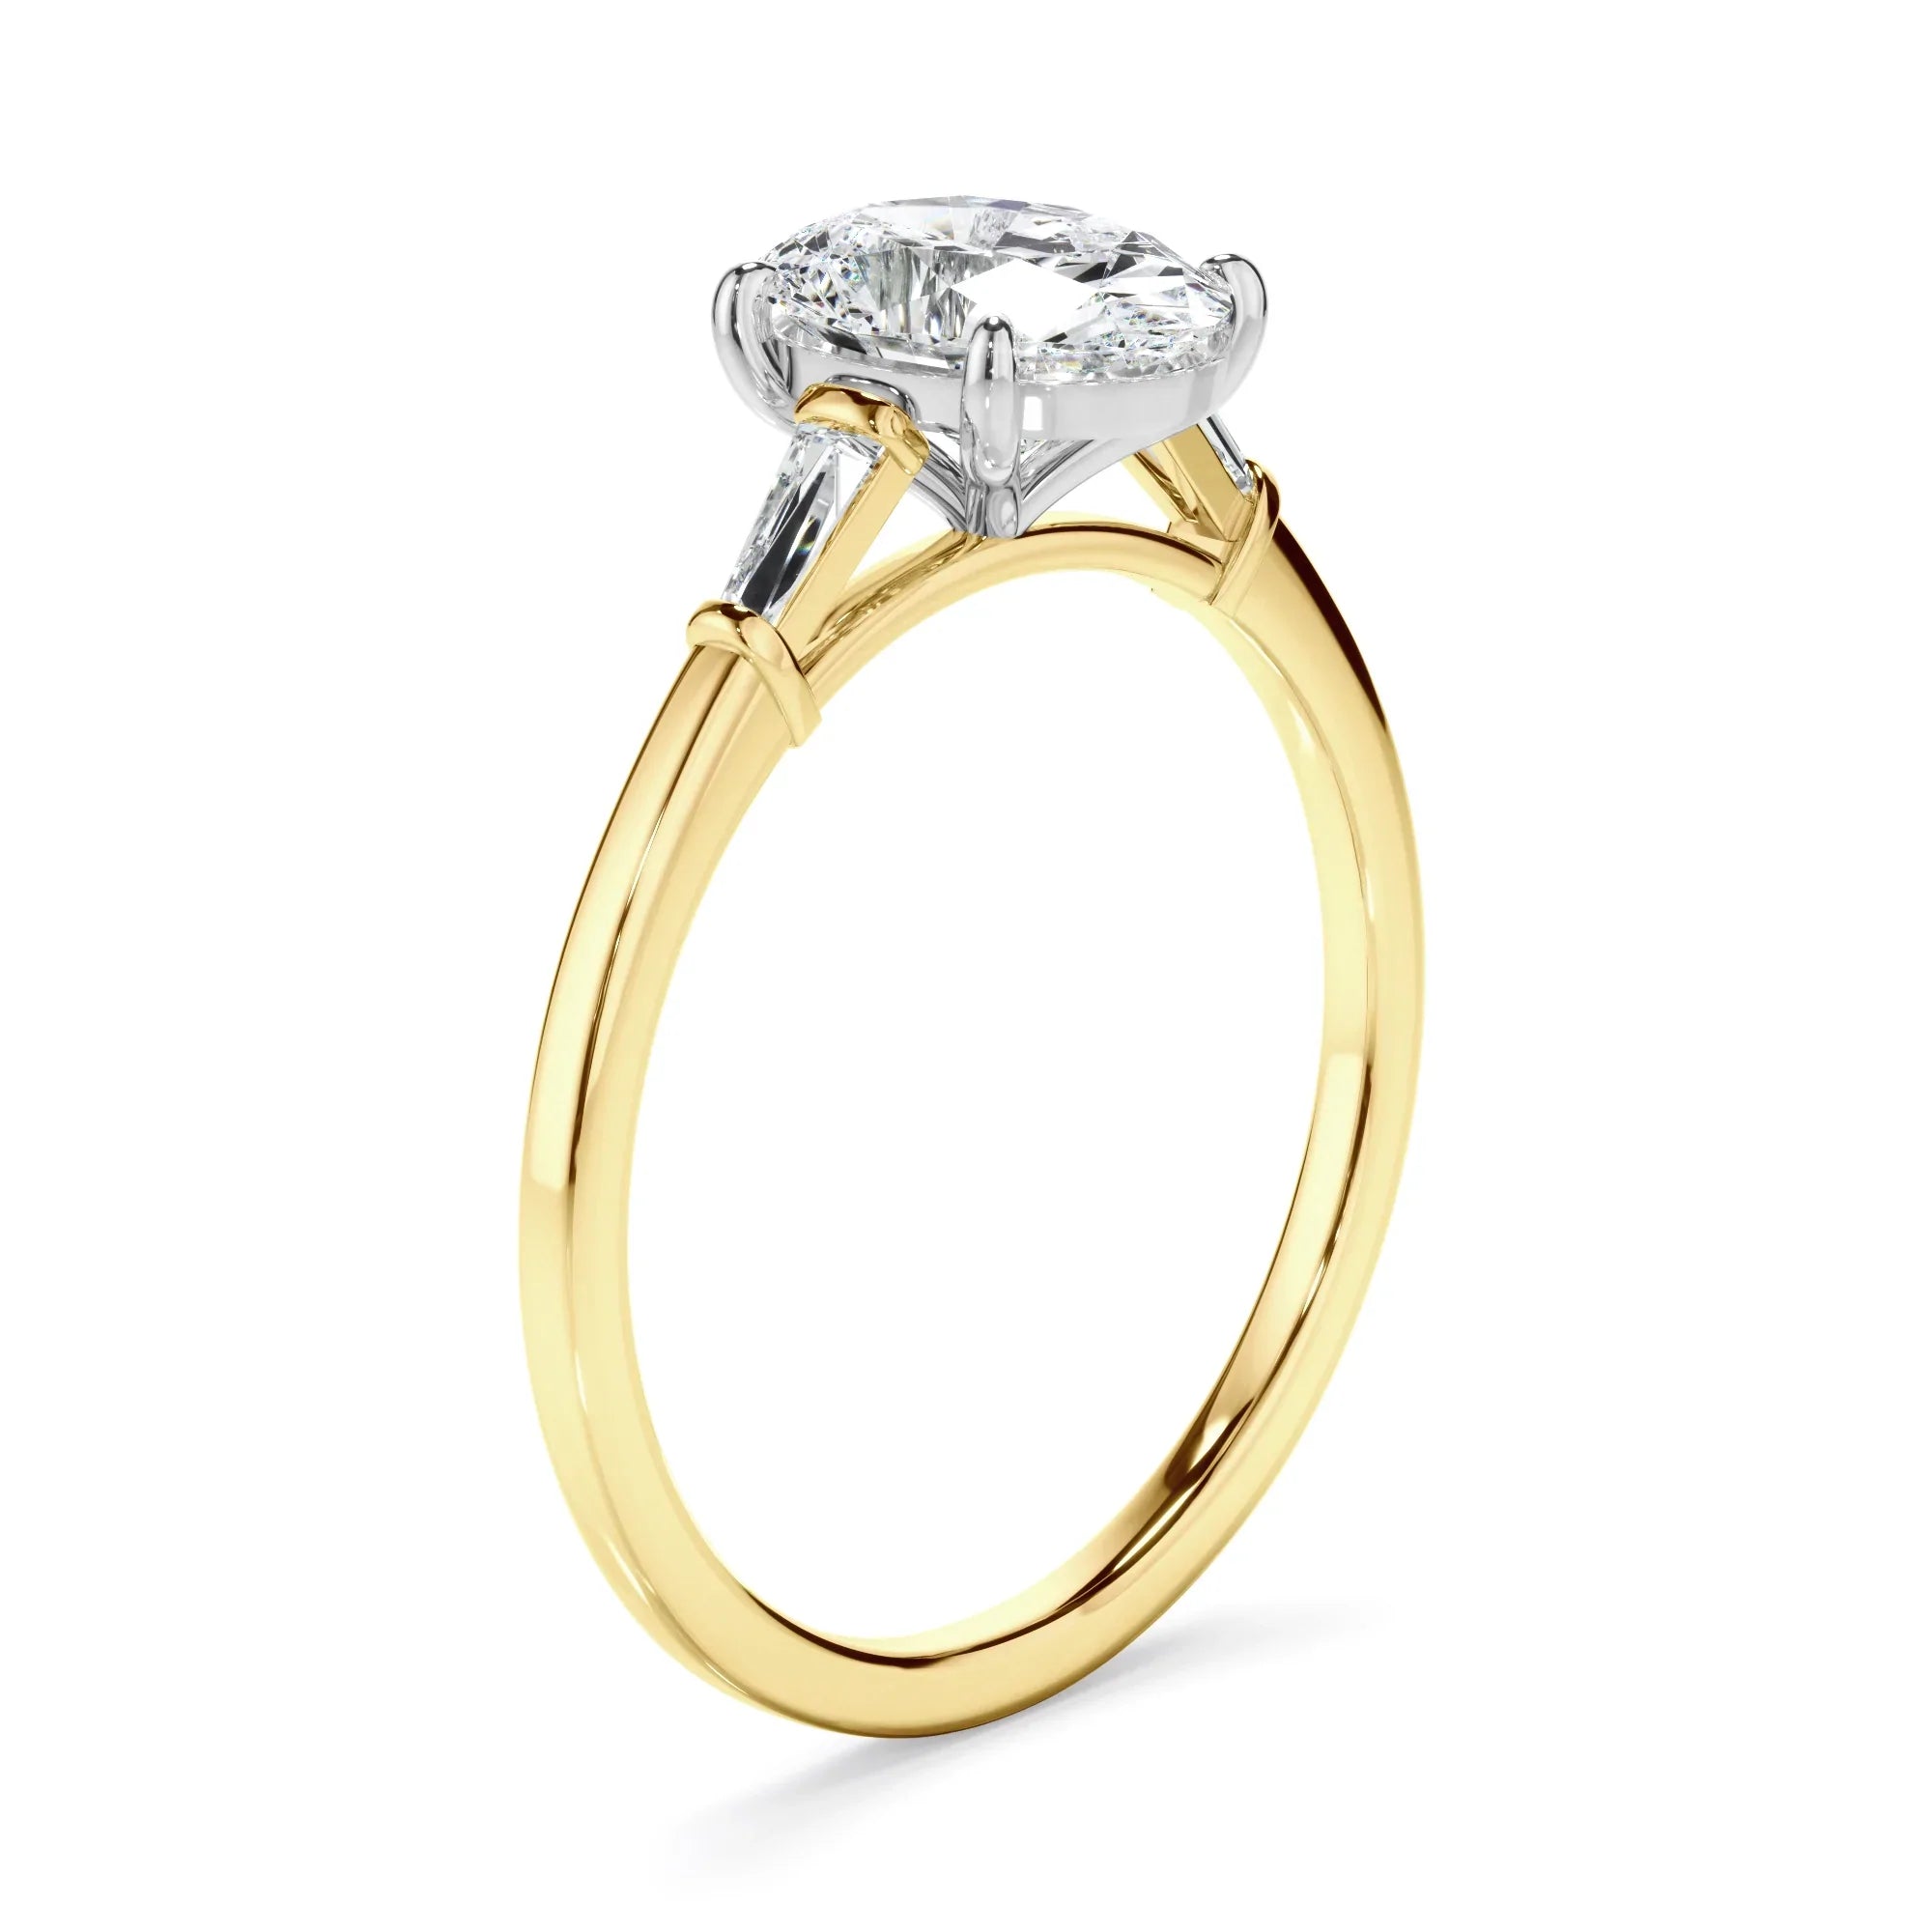 Oval Cut Diamond Engagement Ring With Baguette Sides